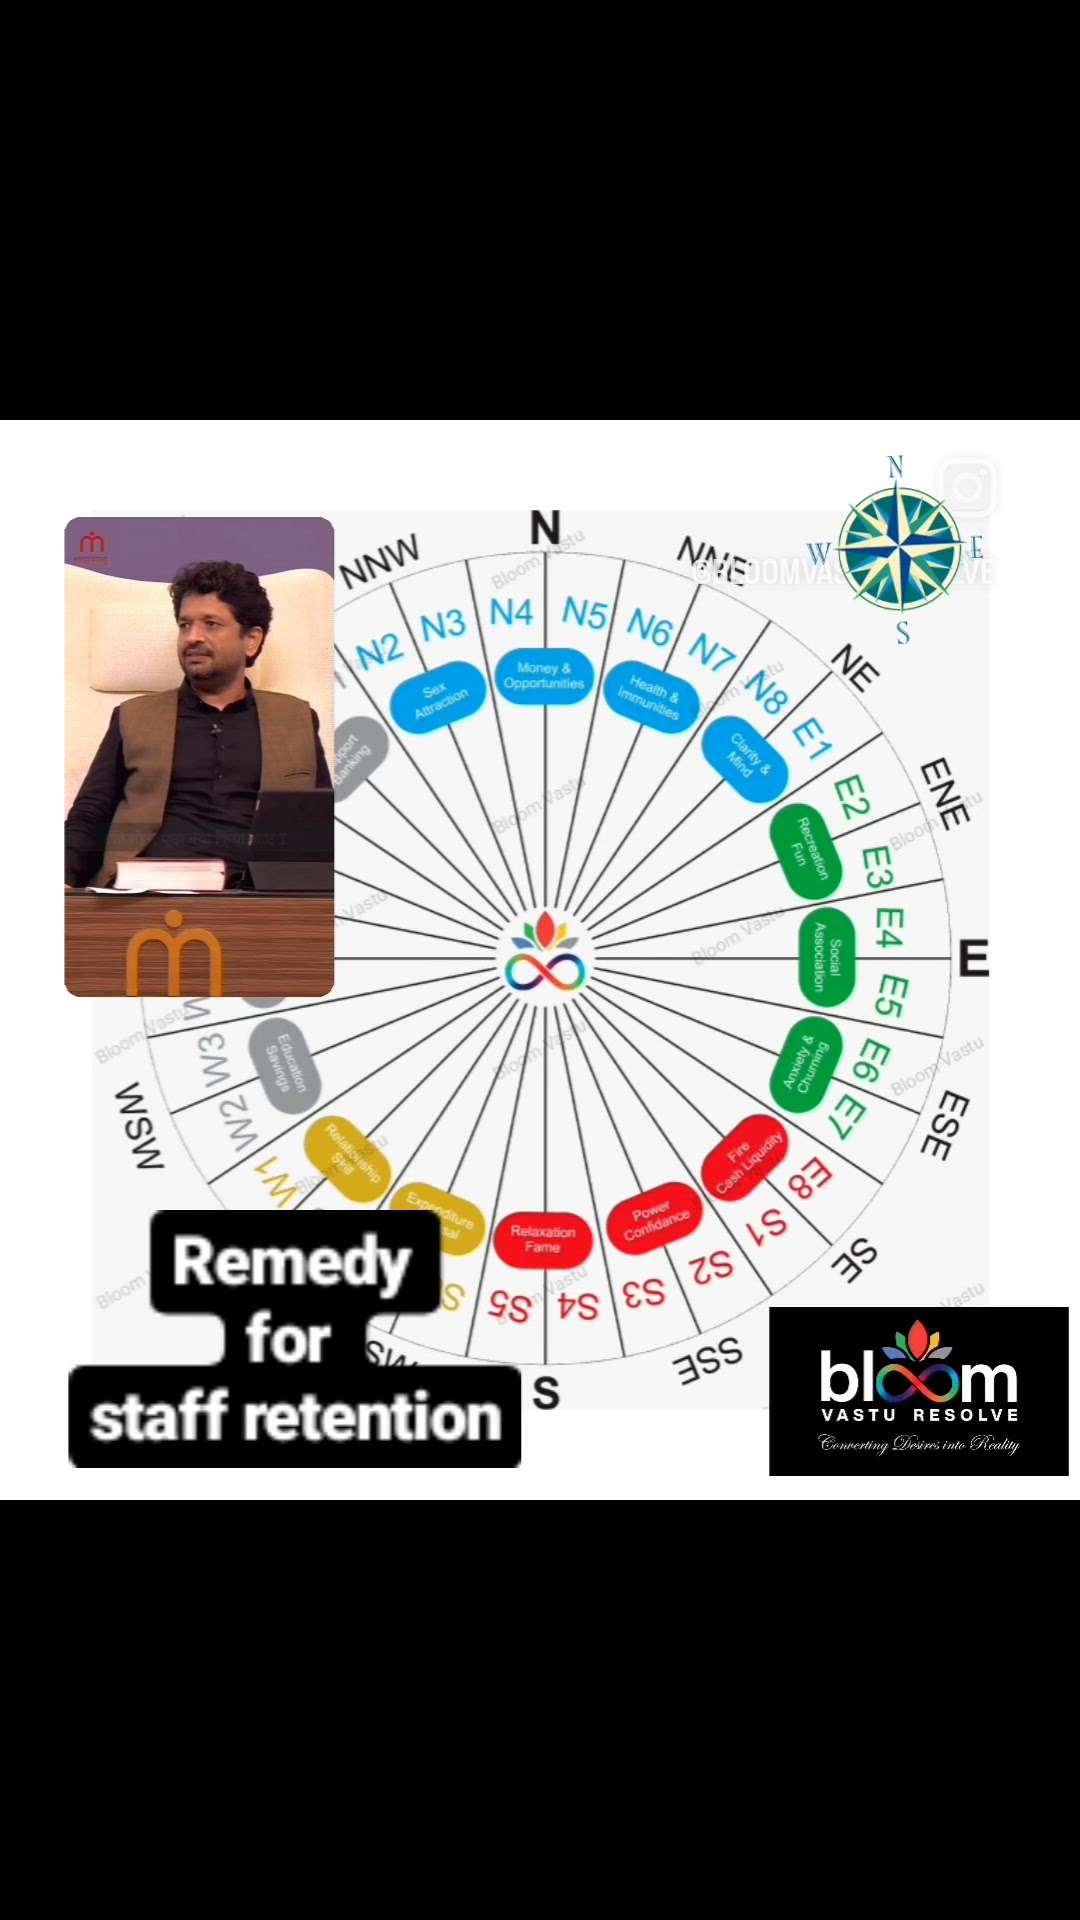 गुरुसखा की वाणी 🎤:   Staff retention remedy.
 comments are always welcome.
For more Vastu please follow @bloomvasturesolve
on YouTube, Instagram & Facebook
.
.
For personal consultation, feel free to contact certified MahaVastu Expert through
M - 9826592271
Or
bloomvasturesolve@gmail.com

#vastu #वास्तु #mahavastu #mahavastuexpert #bloomvasturesolve #vastuforhome #vastureels #vastulogy #vastuexpert #advancevastu #vasturemedy #swzone #vastuforoffice #pendrive #officevastu #vastuforbusiness #vastuforbusinessgrowth